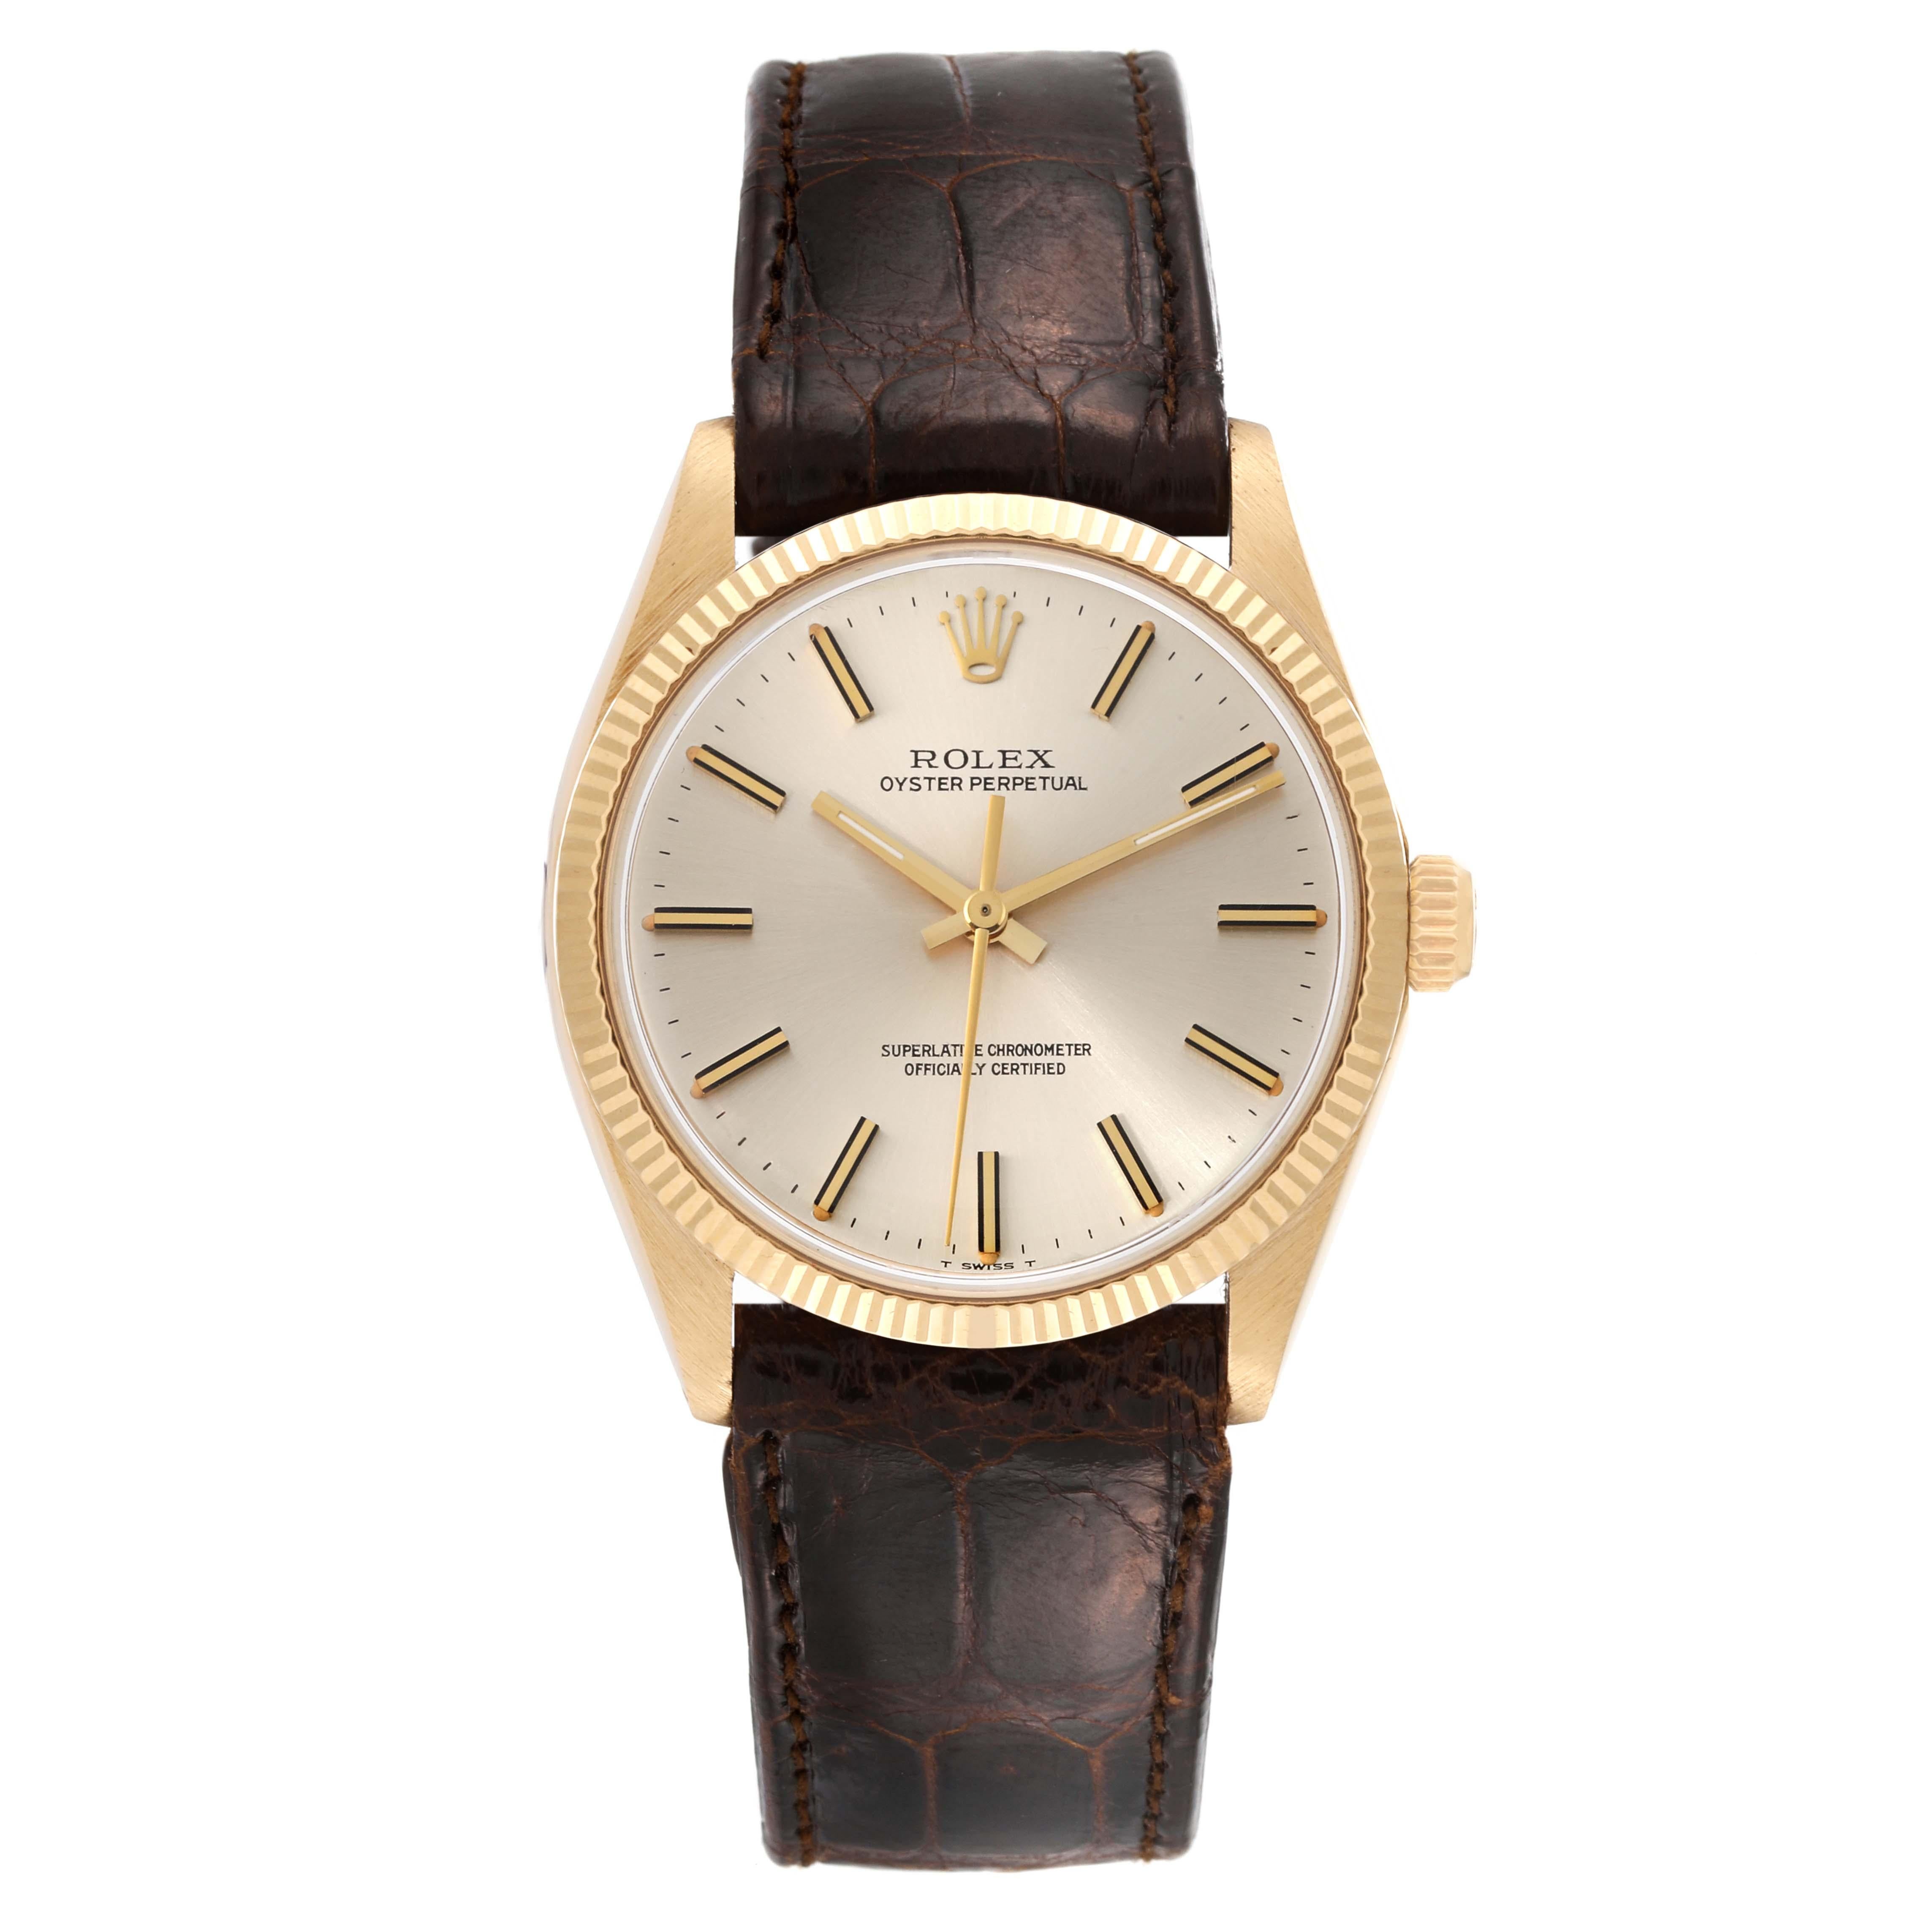 Rolex Oyster Perpetual Yellow Gold Vintage Mens Watch 1005 Box Papers. Officially certified chronometer automatic self-winding movement. 18K yellow gold oyster case 34.0 mm in diameter.  Rolex logo on a crown. 18K yellow gold fluted bezel. Acrylic